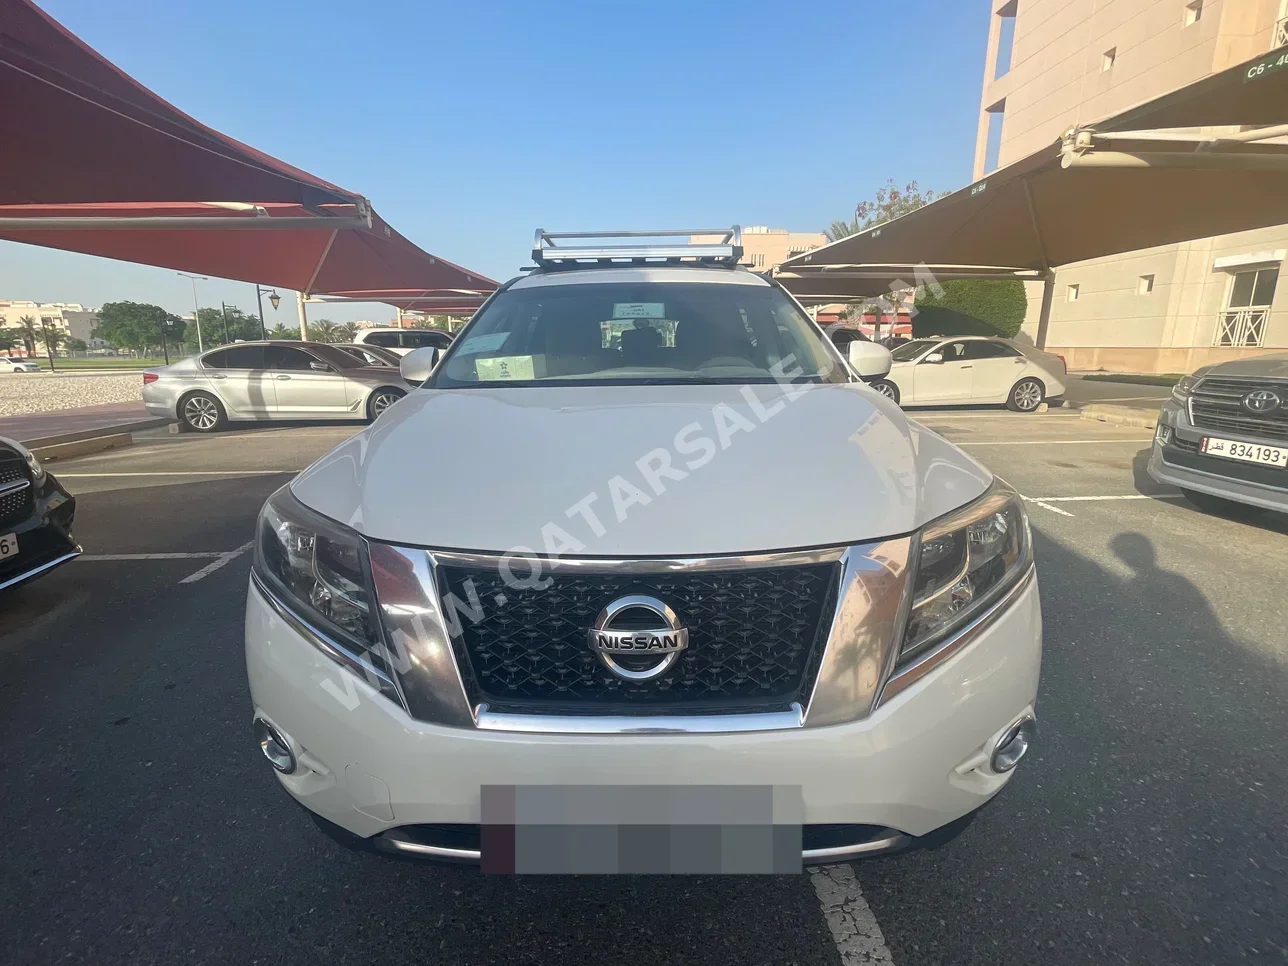 Nissan  Pathfinder  SV  2015  Automatic  176,000 Km  6 Cylinder  Four Wheel Drive (4WD)  SUV  White